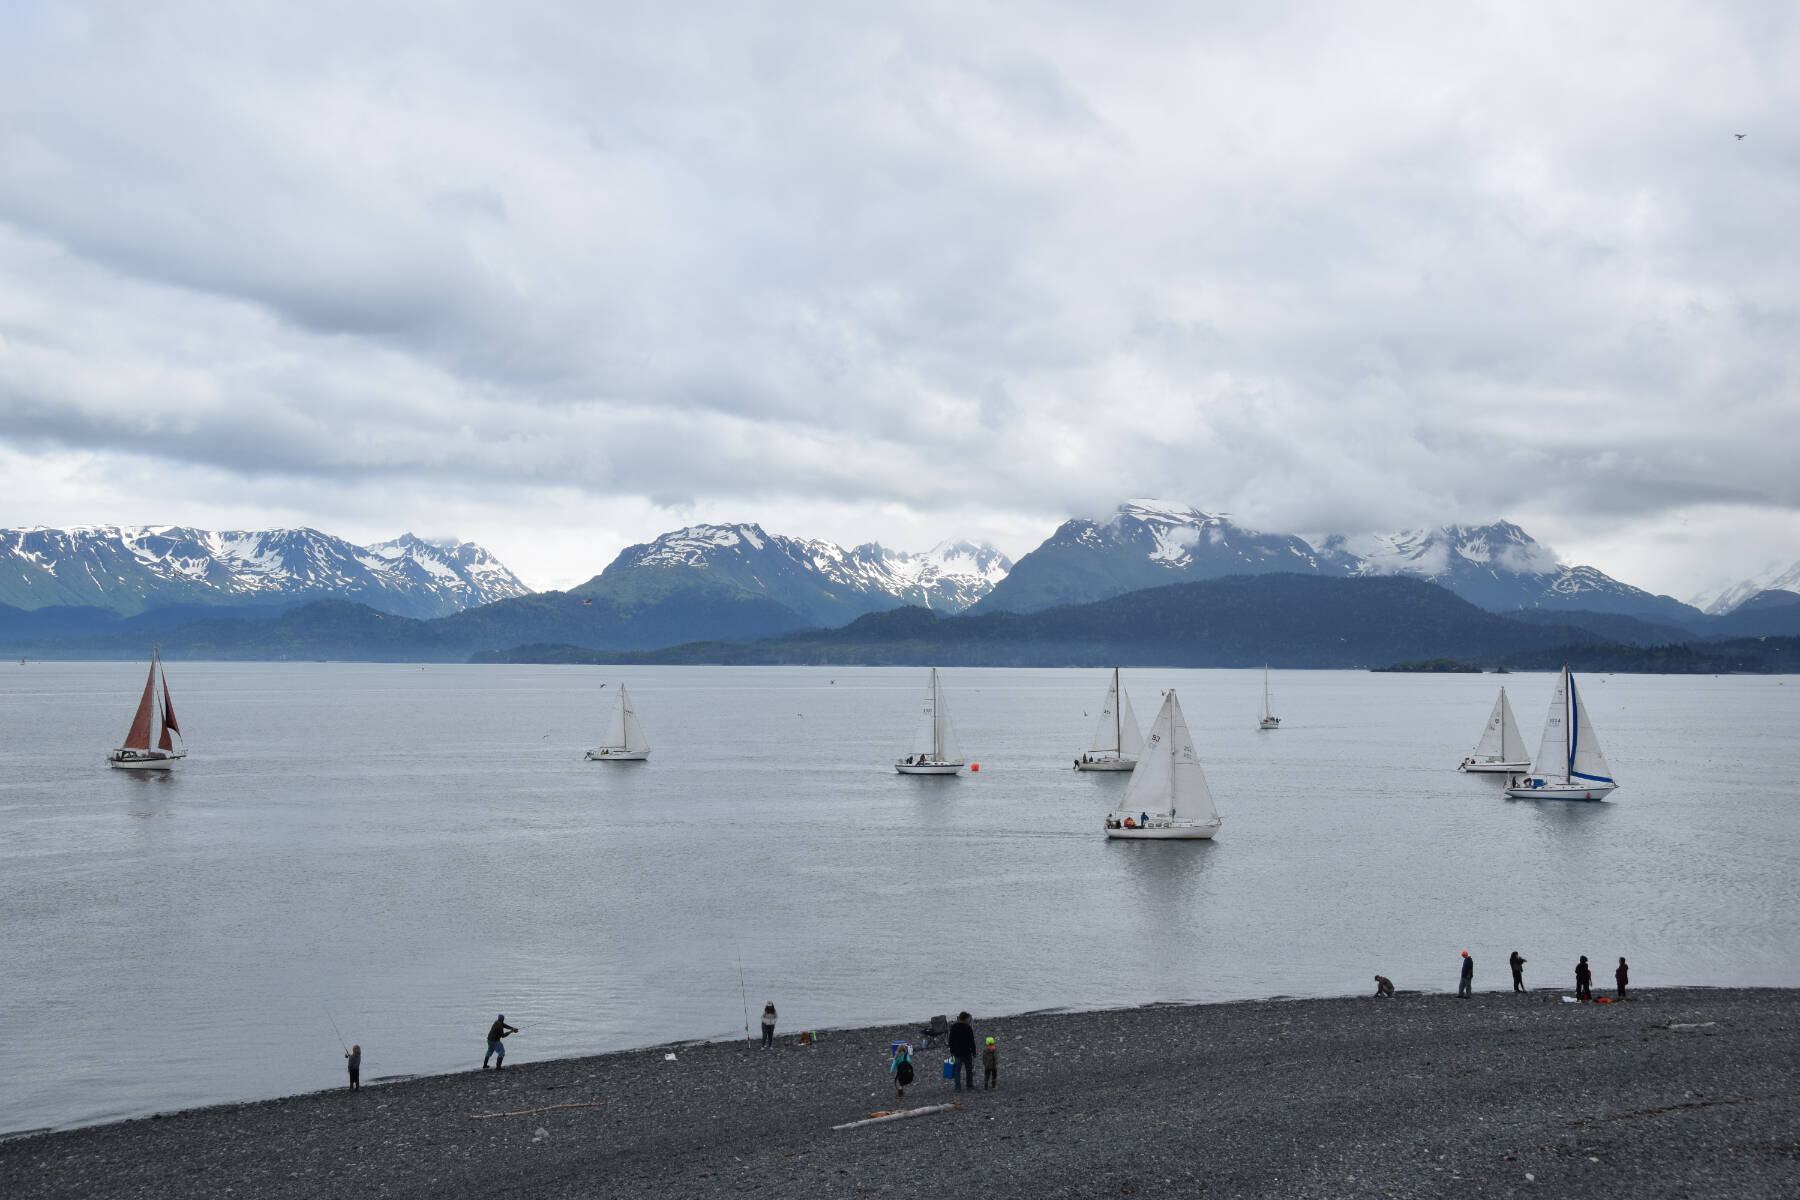 Members of the Homer Yacht Club start the course set for the Homer Yacht Club Regatta on Saturday, June 26, 2023 in the Kachemak Bay below Land’s End Resort in Homer, Alaska. This is the 26th year the club has been conducting regattas in Homer. (Delcenia Cosman/Homer News)